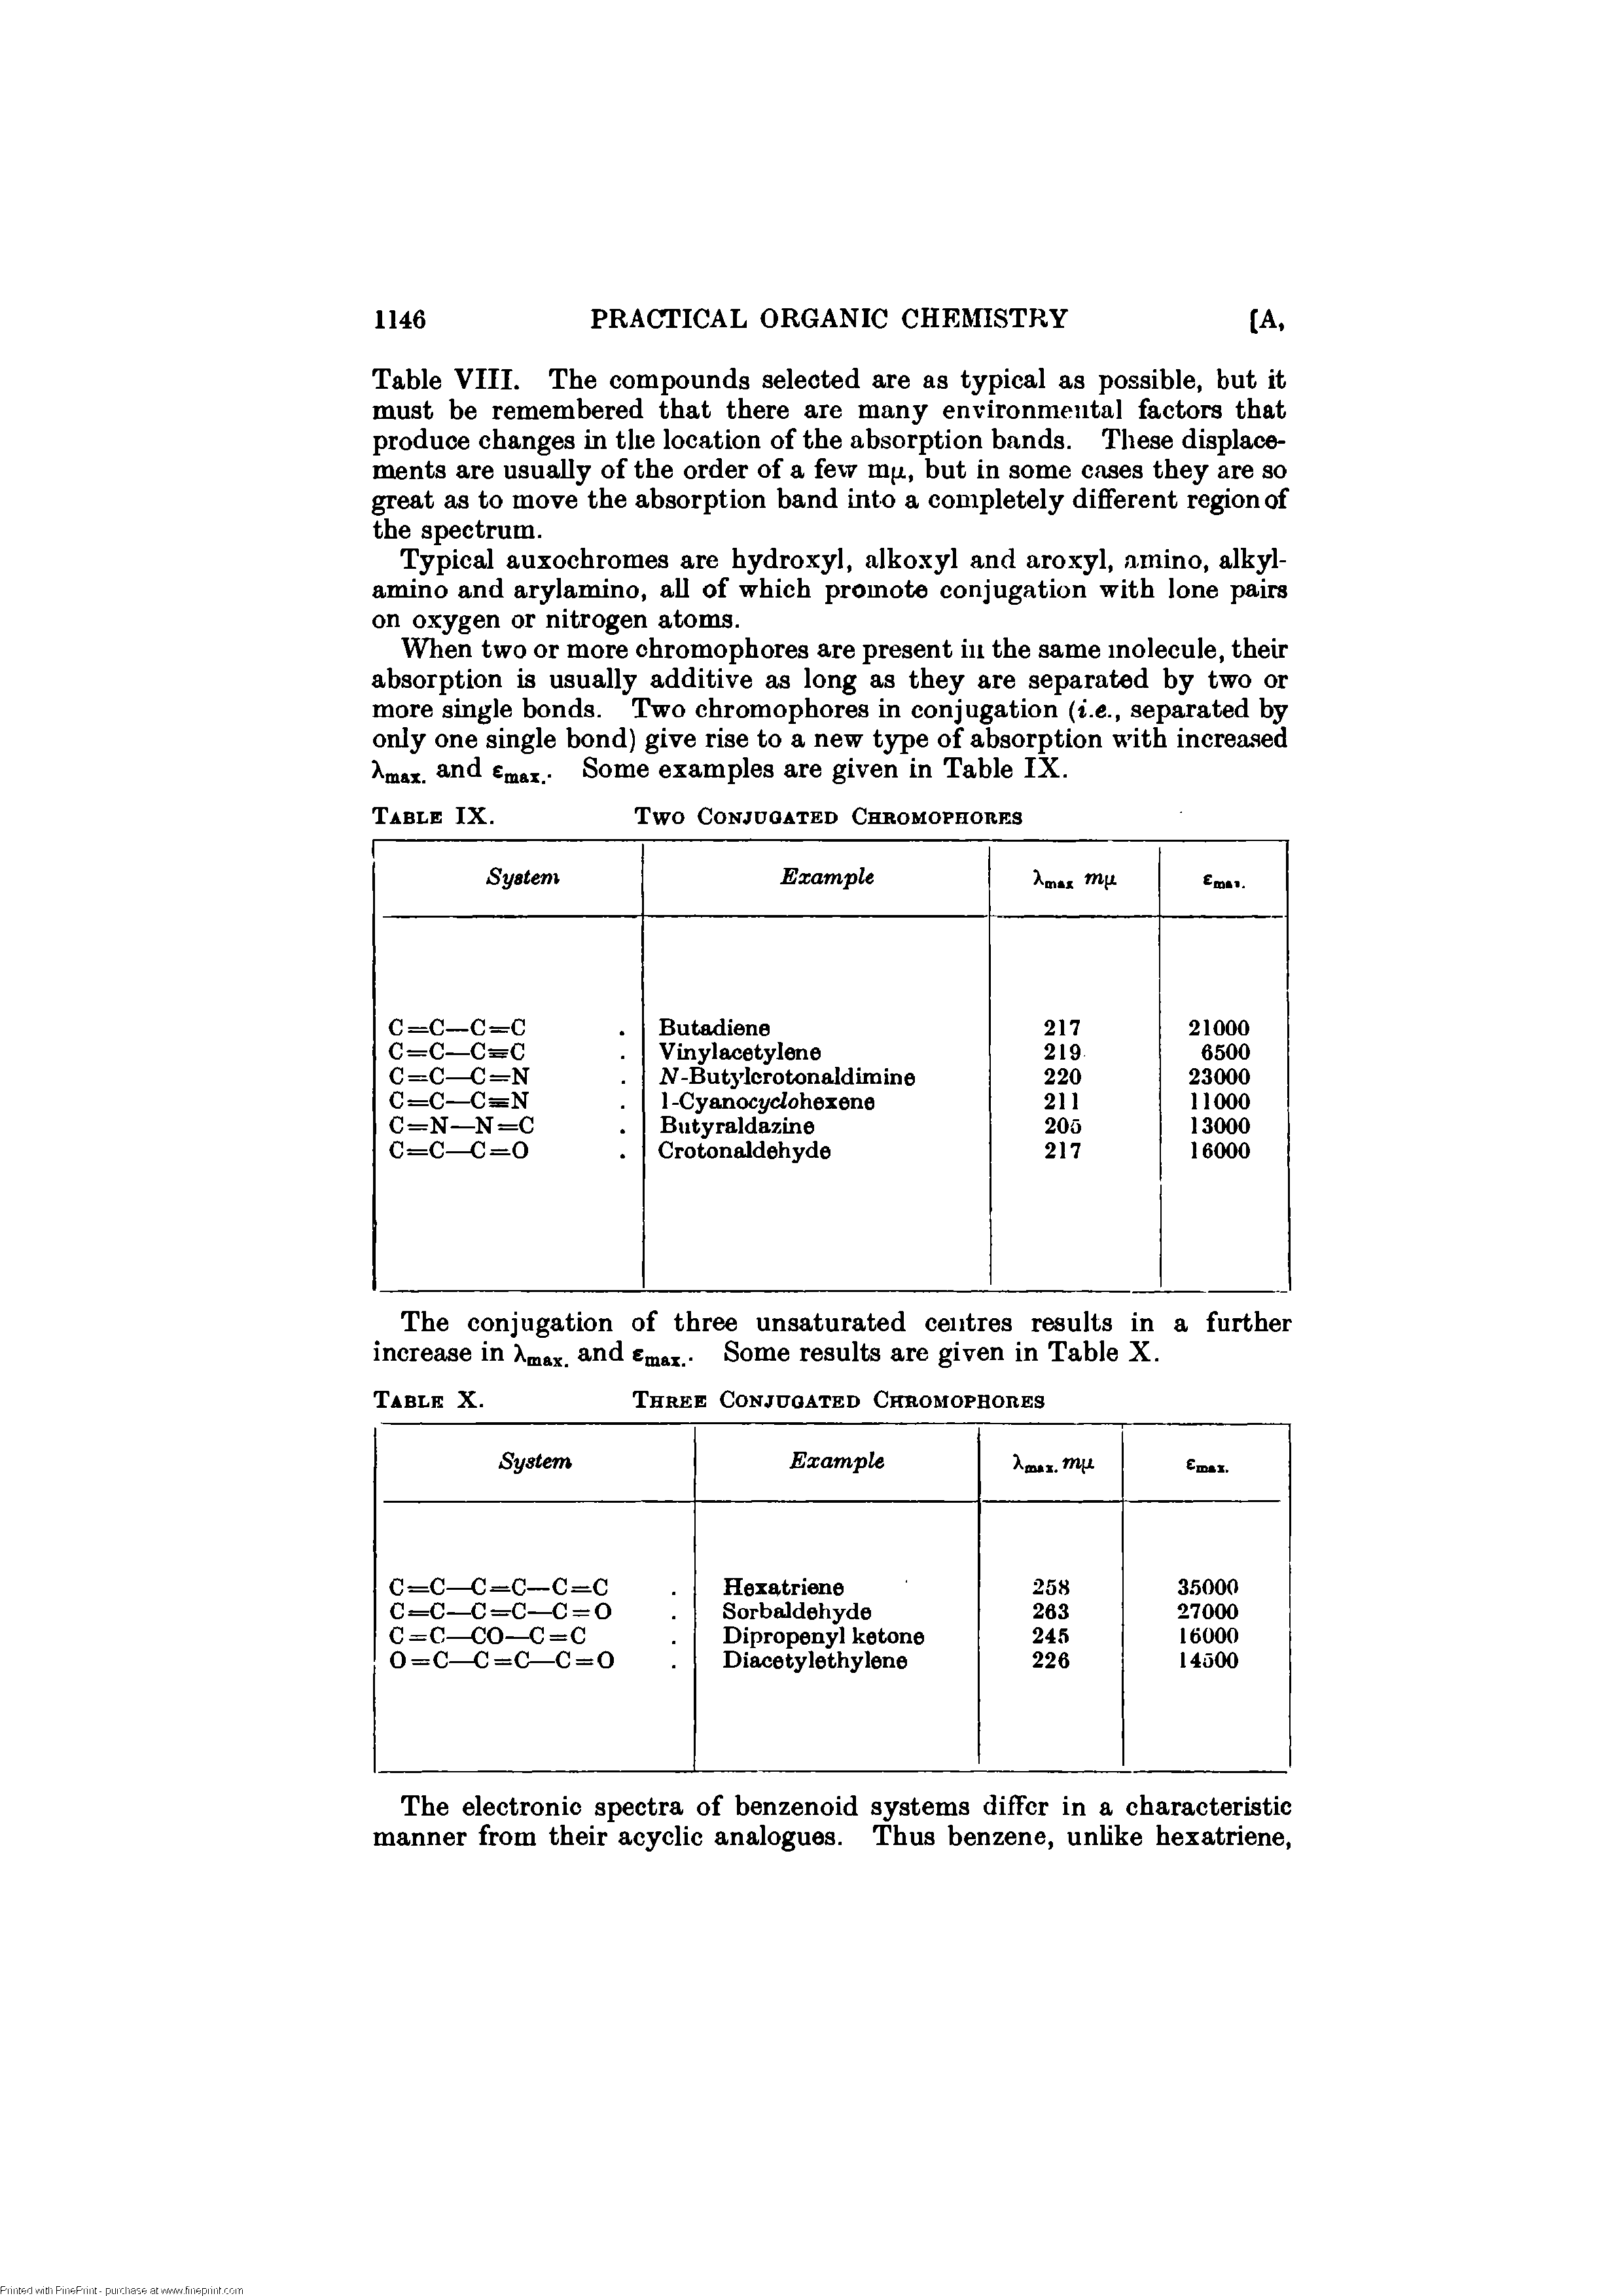 Table VIII. The compounds selected are as typical as possible, but it must be remembered that there are many environmental factors that produce changes in the location of the absorption bands. These displacements are usually of the order of a few mp., but in some cases they are so great as to move the absorption band into a completely different region of the spectrum.